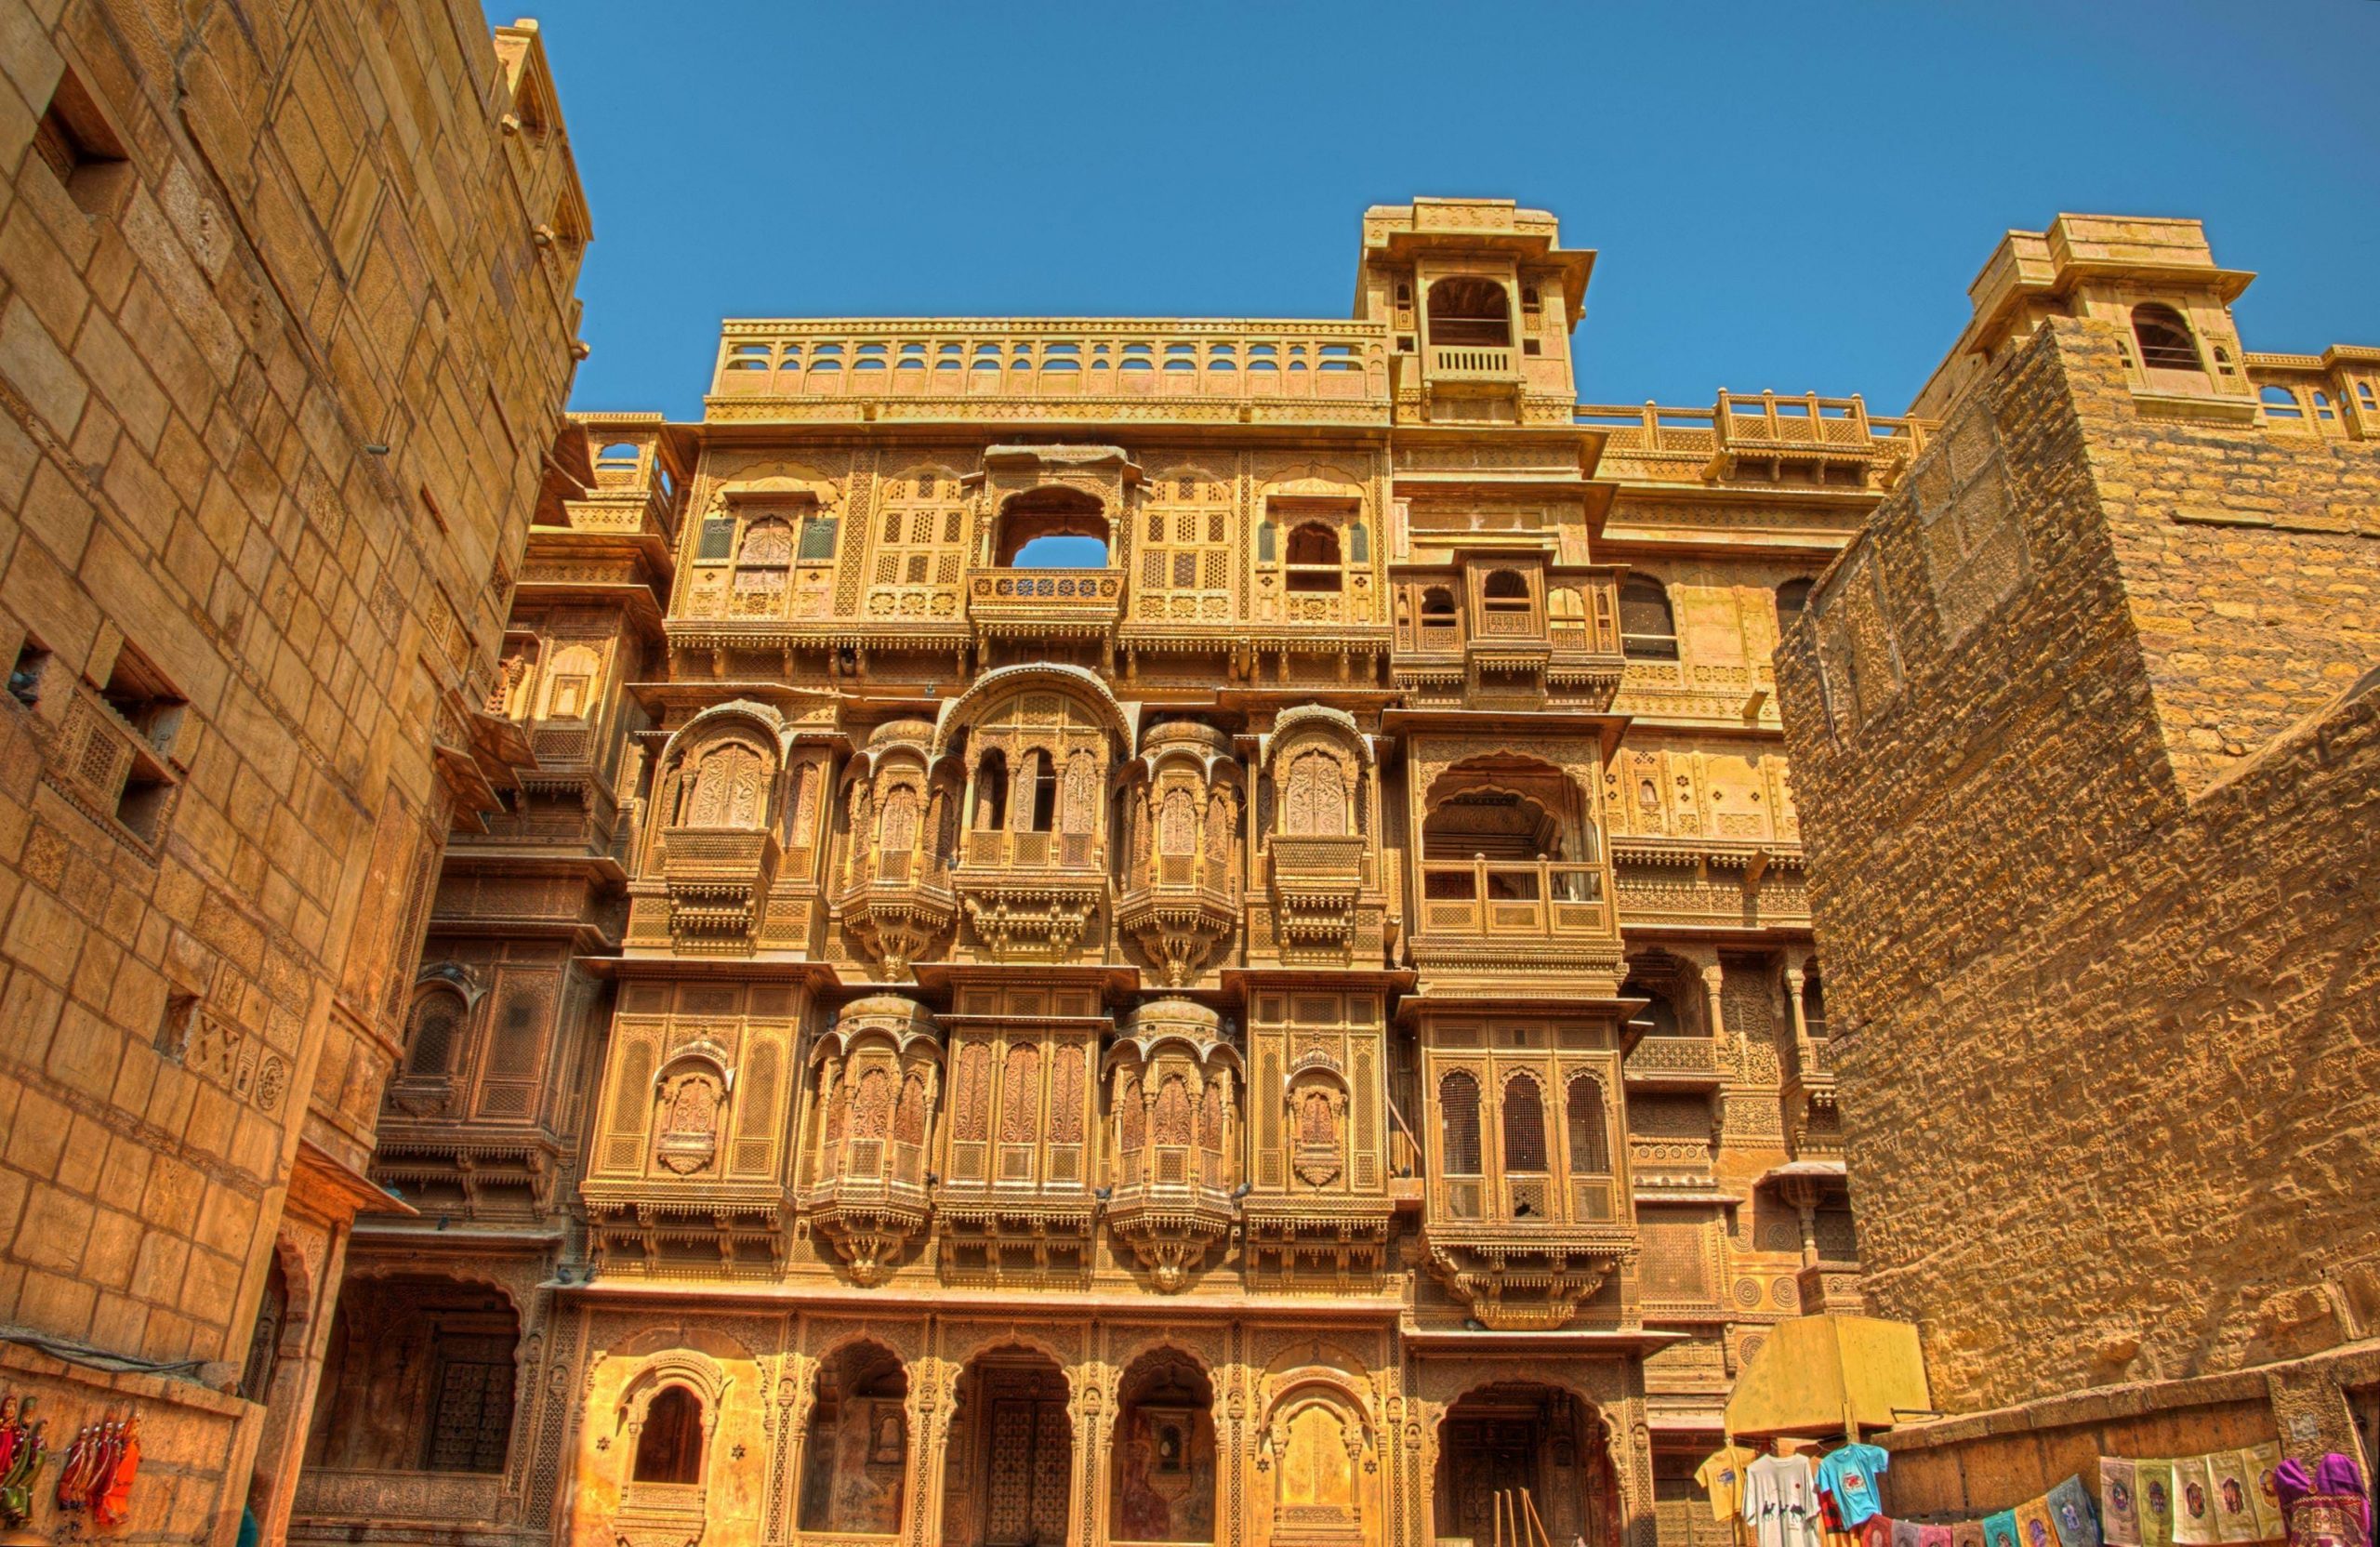 Rajasthan- Land of the Kings